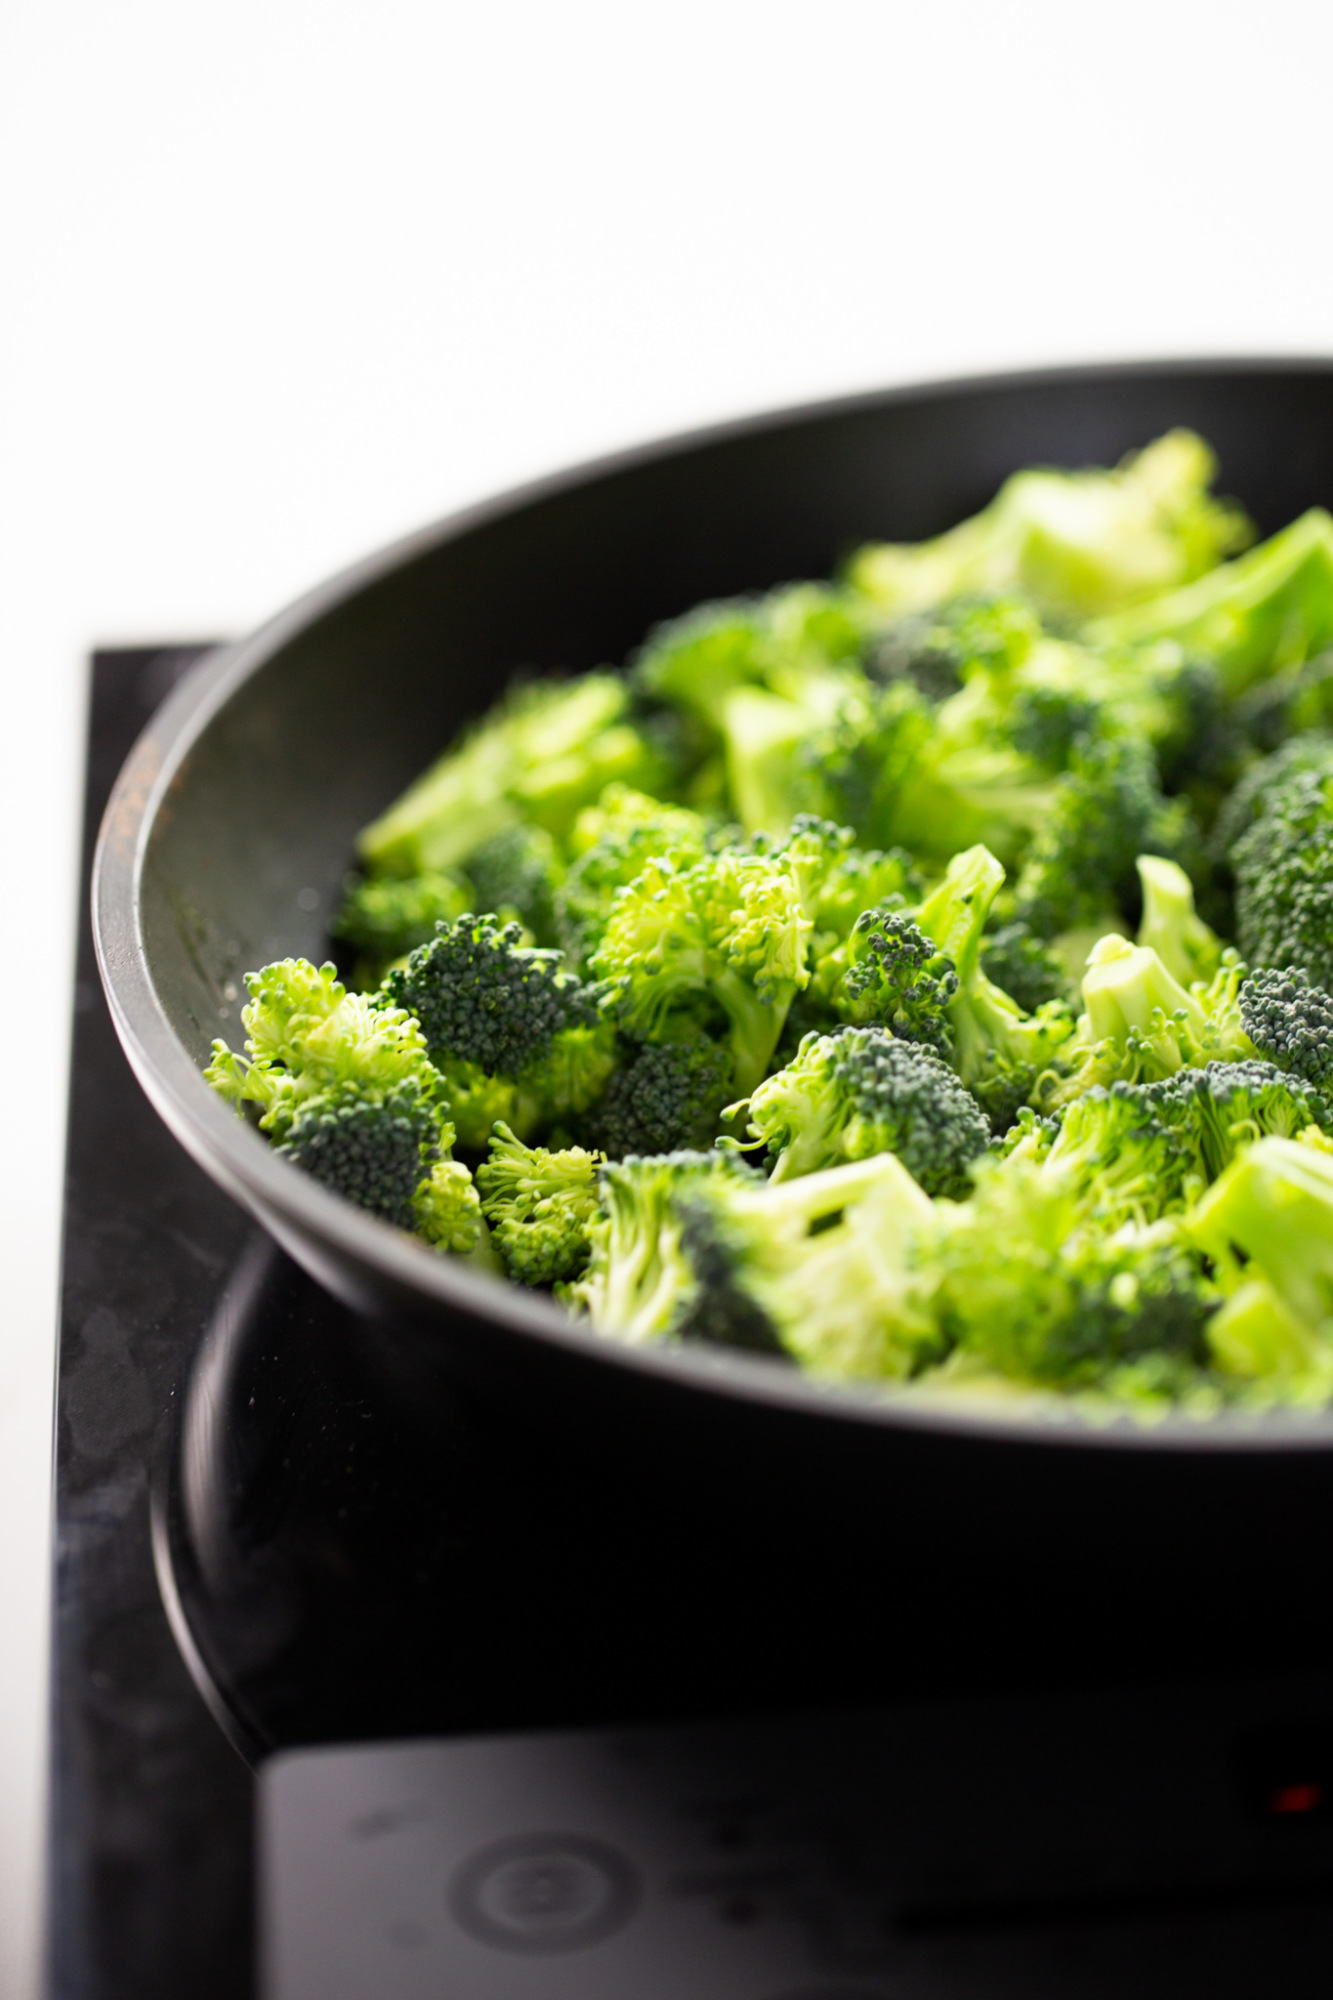 Broccoli in a pan